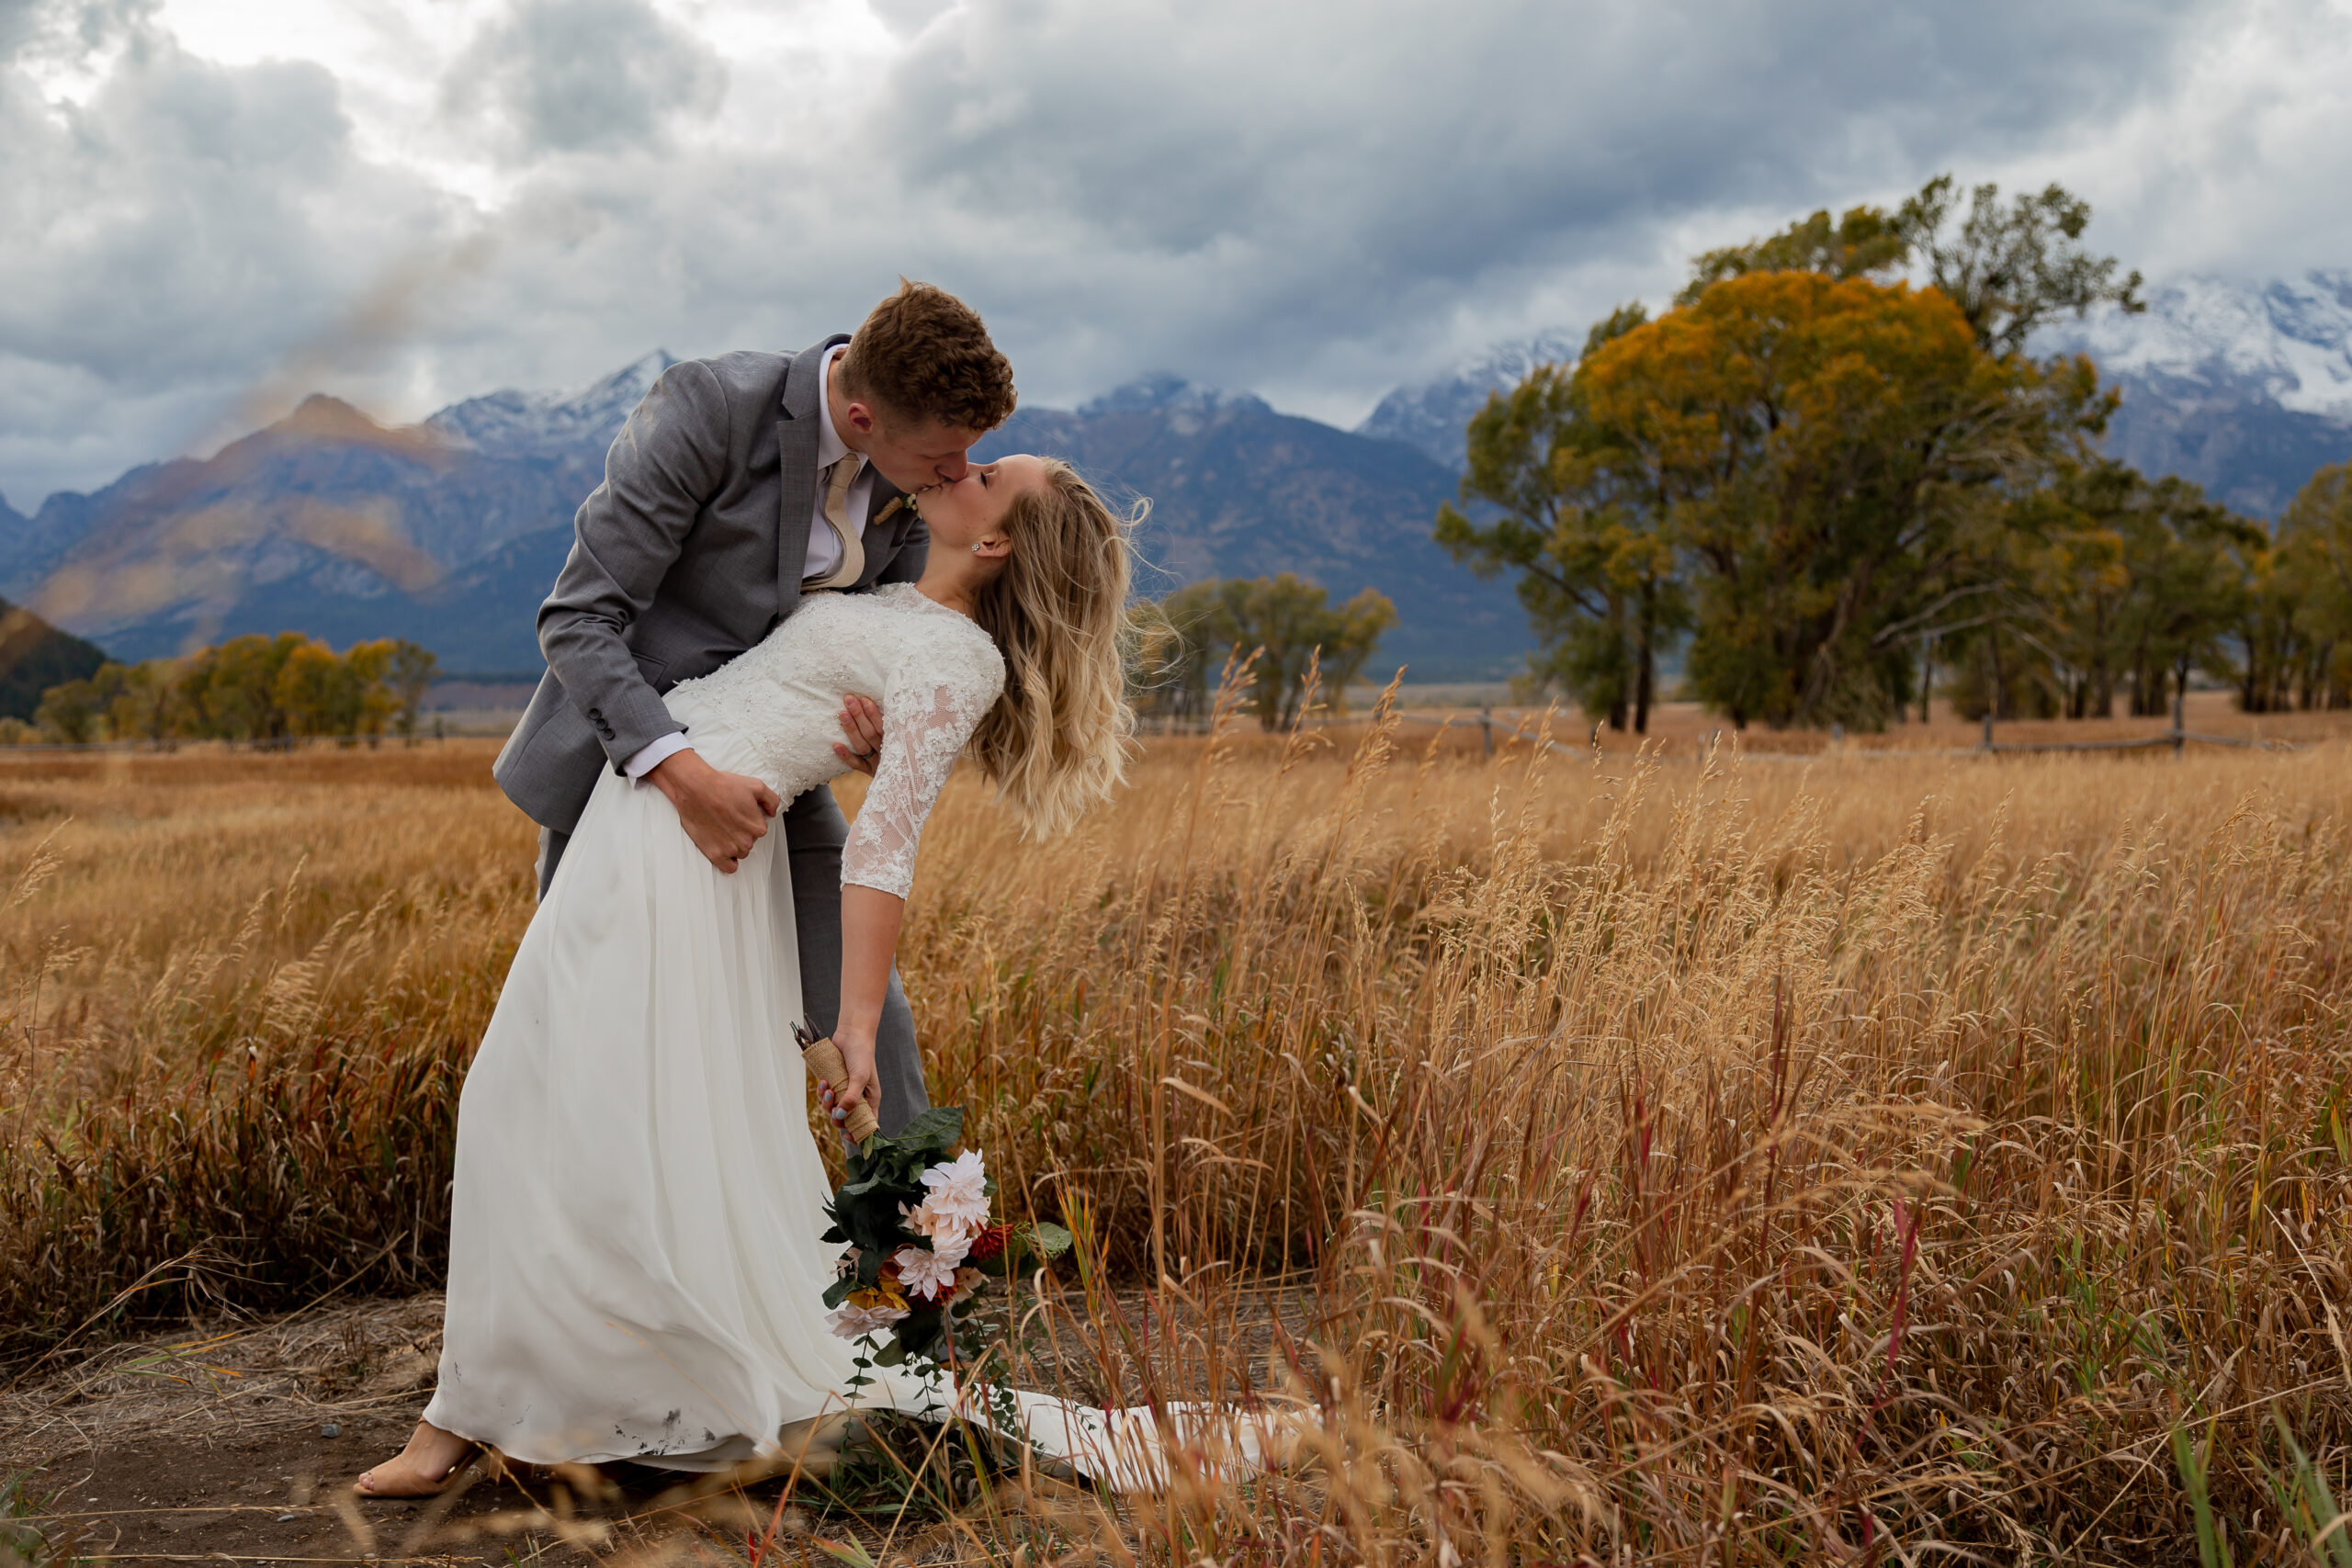 Fall Elopement in Grand Teton National Park in Jackson Hole, Wyoming. Groom is dipping bride and they are kissing while the wind is blowing through the bride's hair.